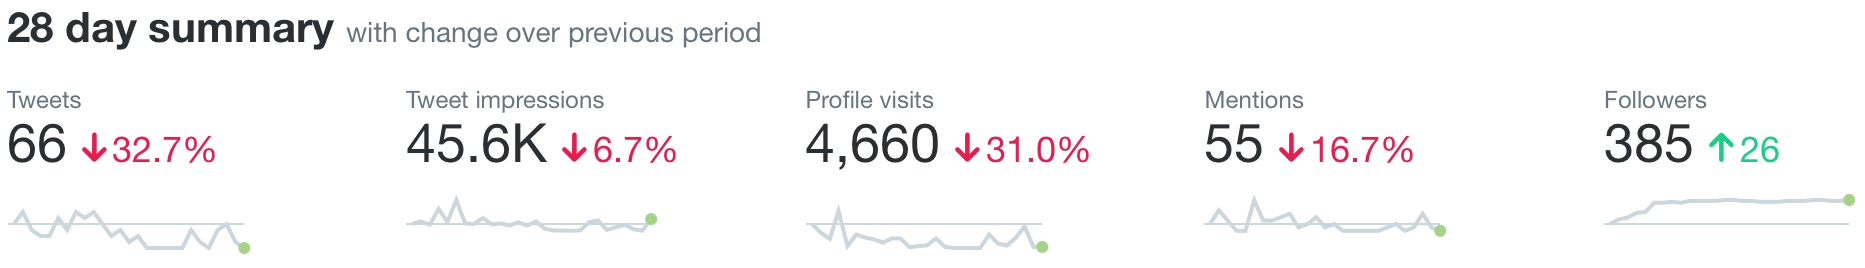 A screenshot of my Twitter analytics for May 2021. It shows 66 tweets, 45,600 tweet impressions, 4,660 profile visits, 55 mentions, and 385 followers (26 more than last month).